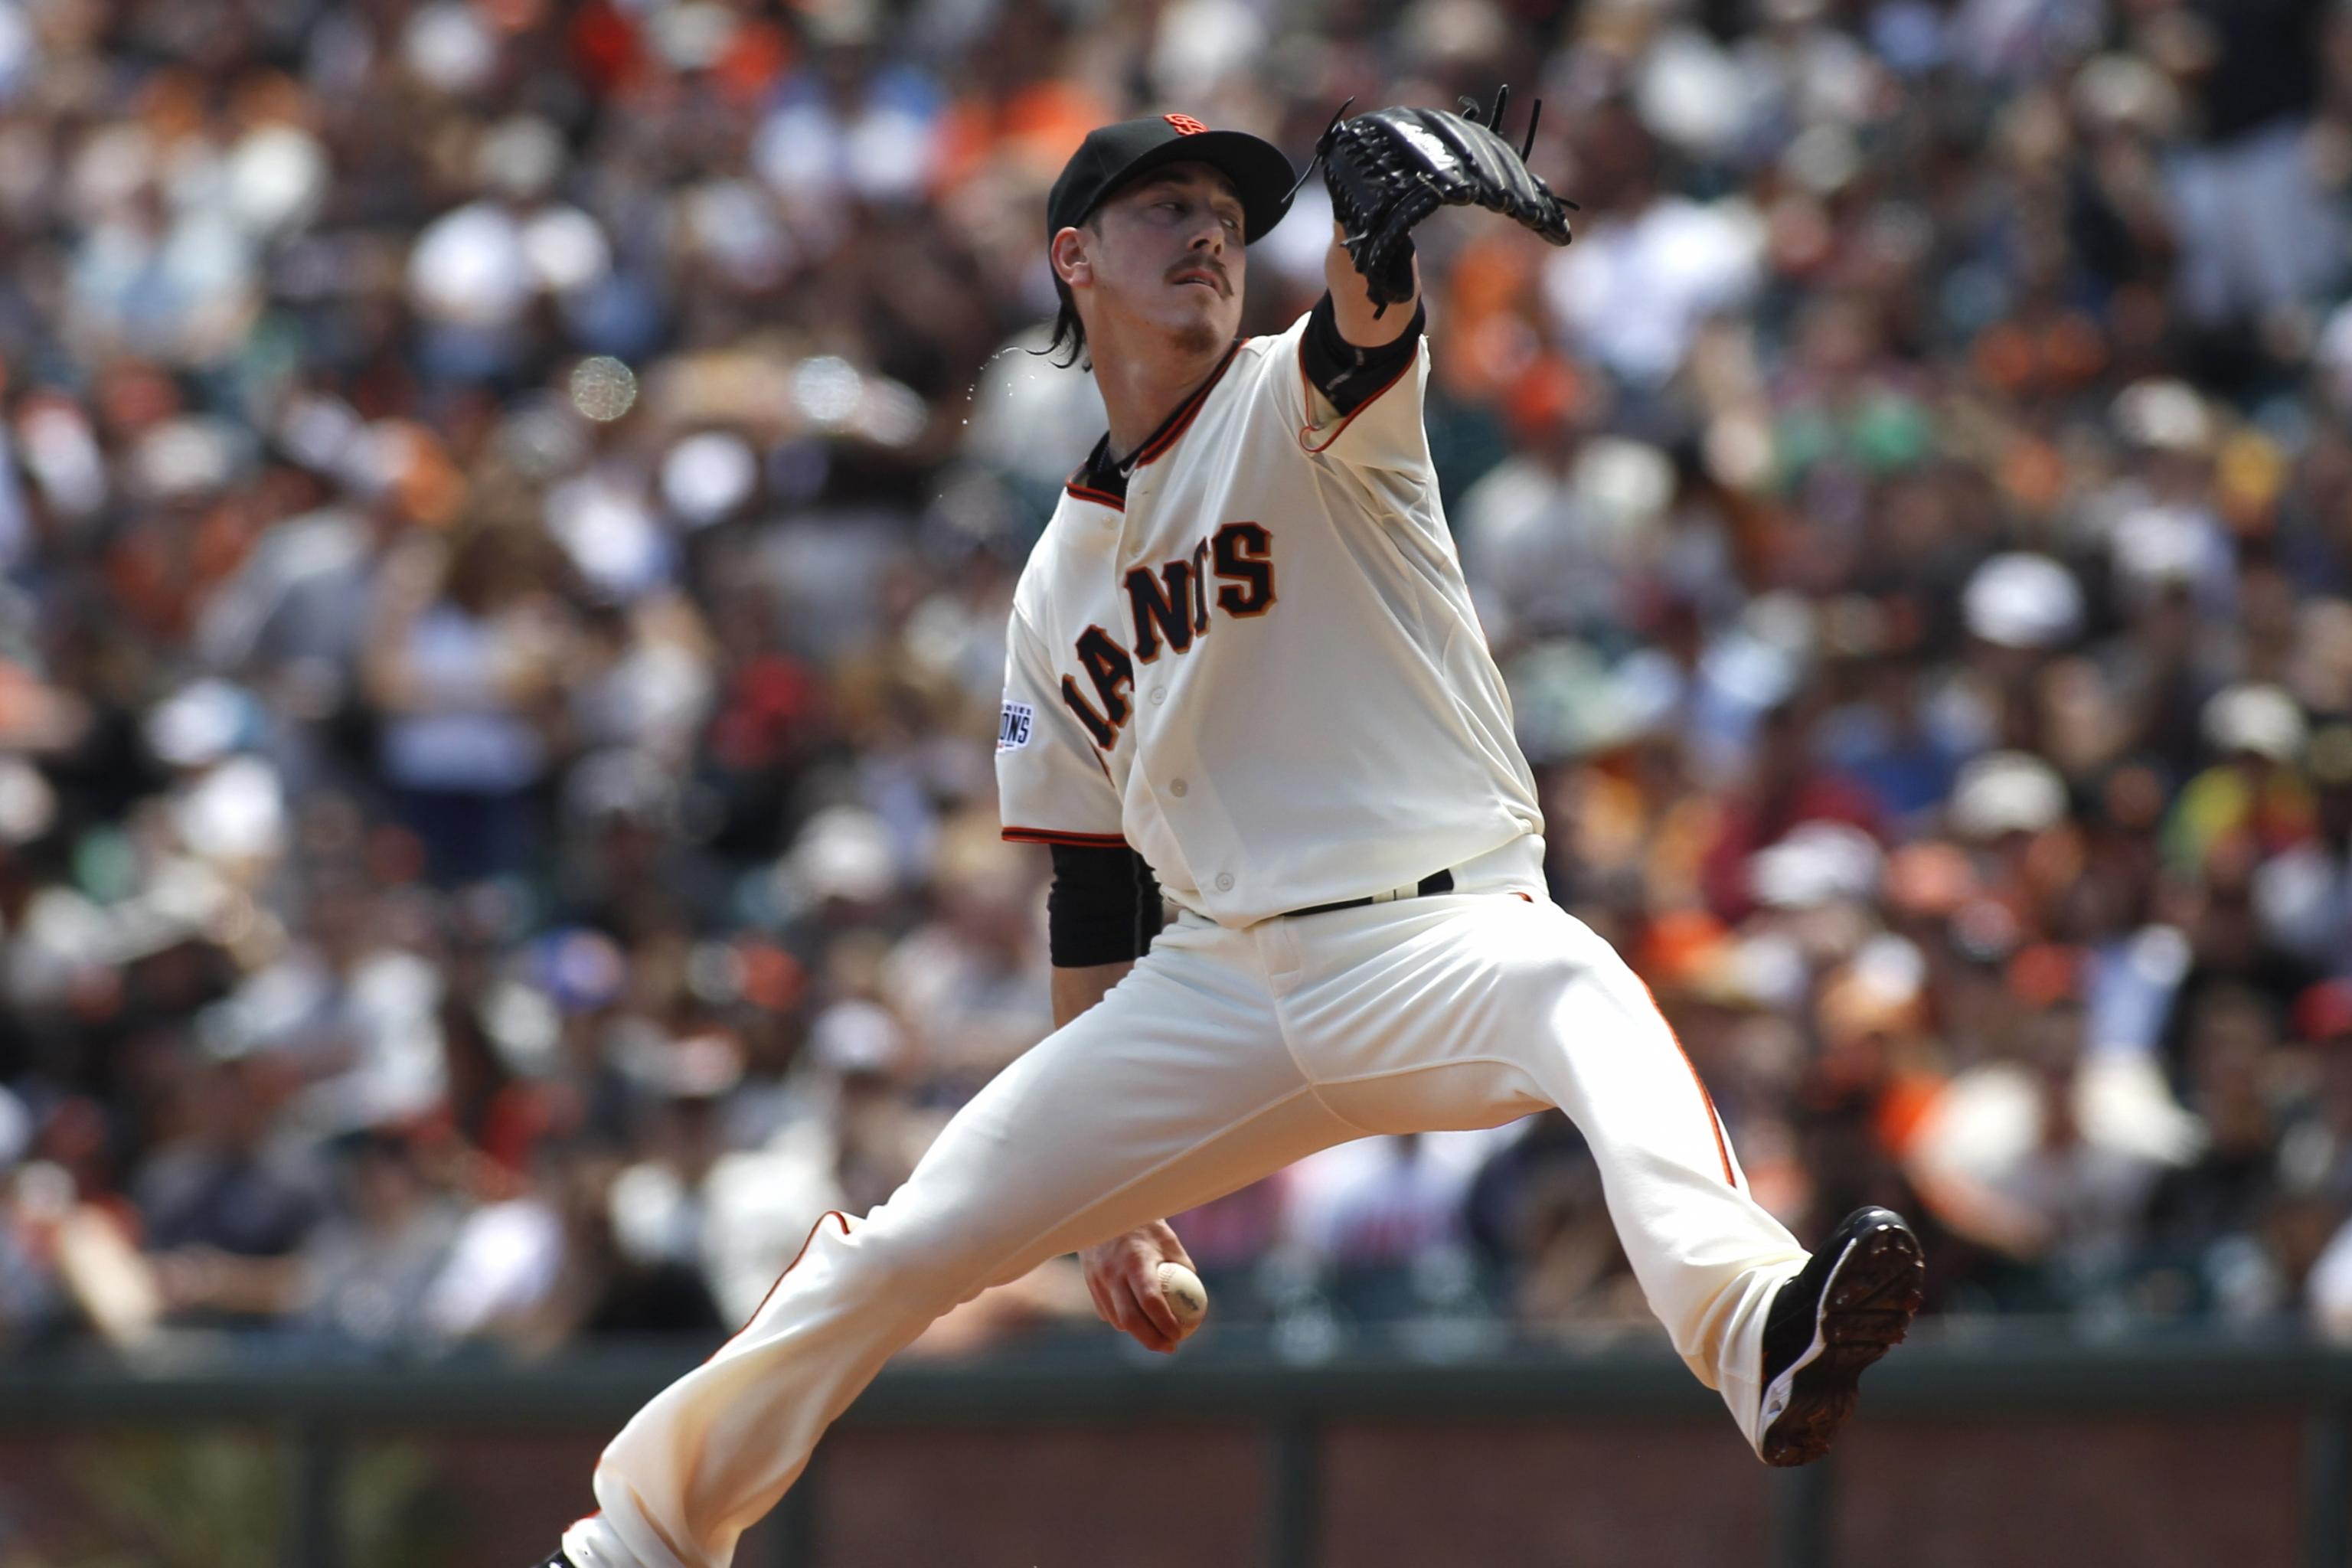 MLB Notes: Tim Lincecum signs $2.5 million, 1-year deal with Angels